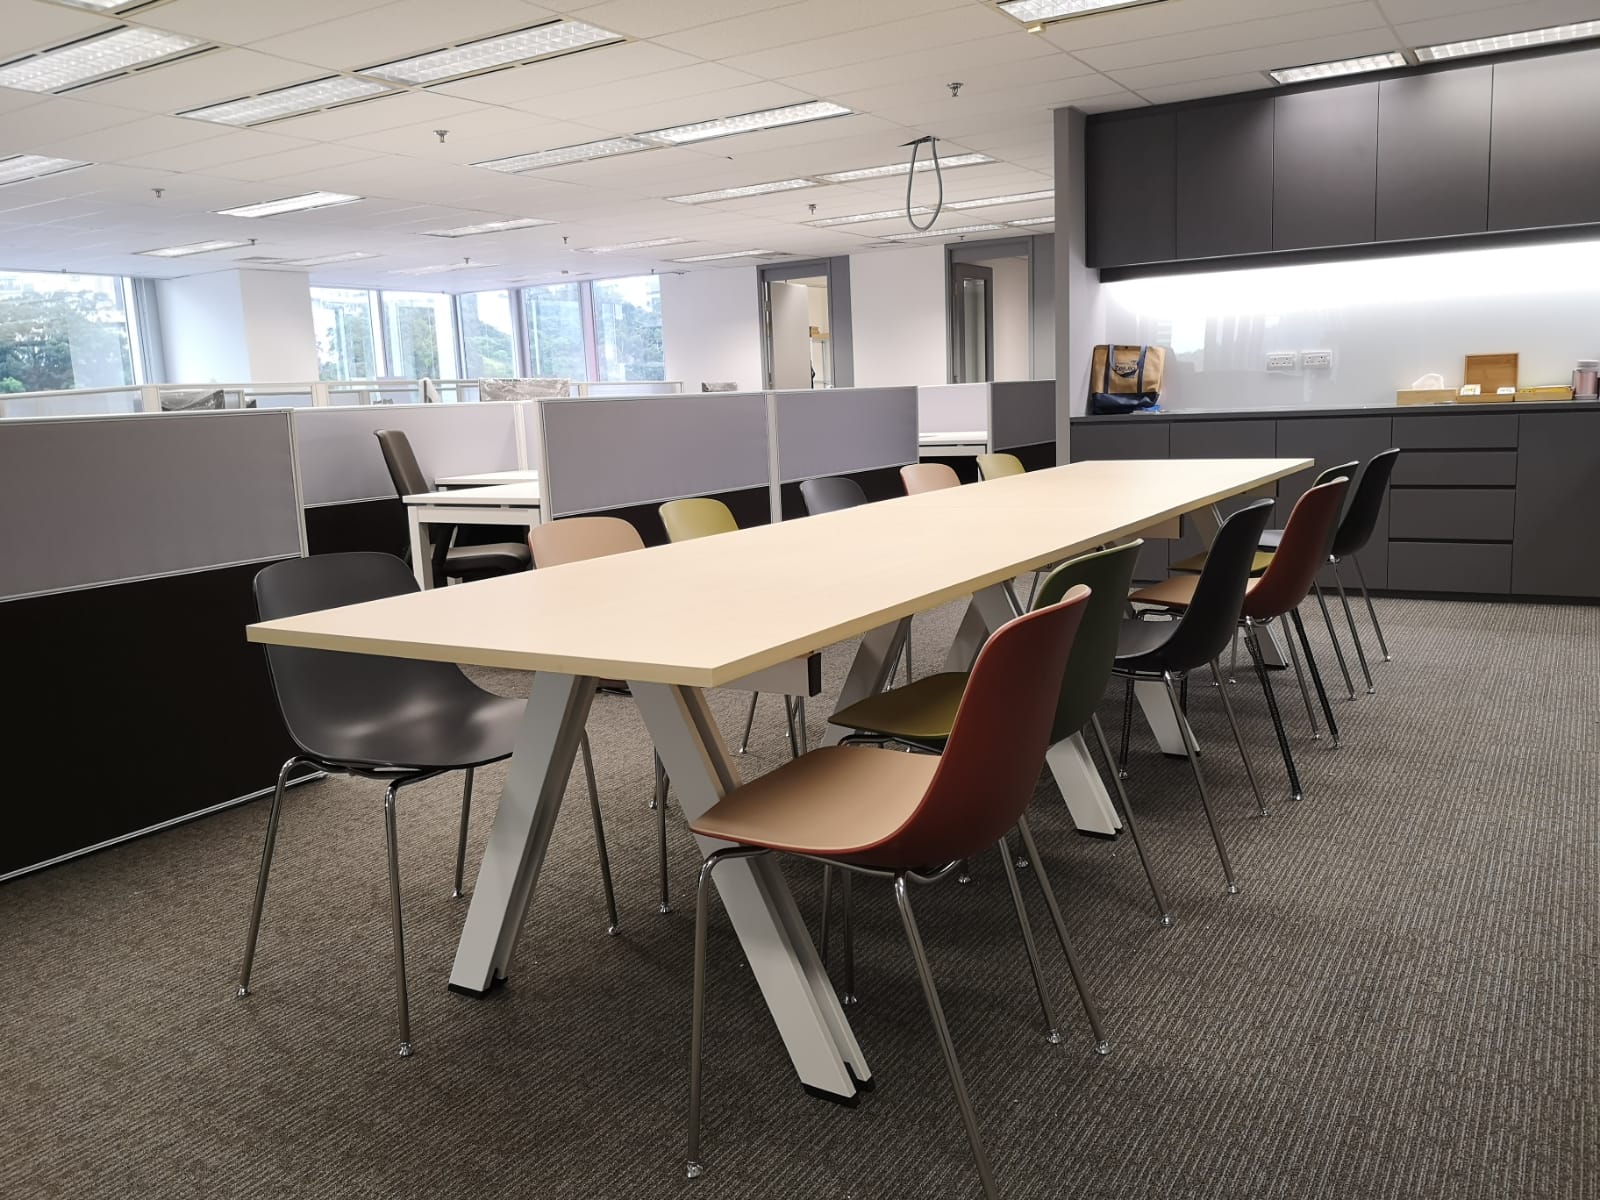 How to choose panel office furniture correctly